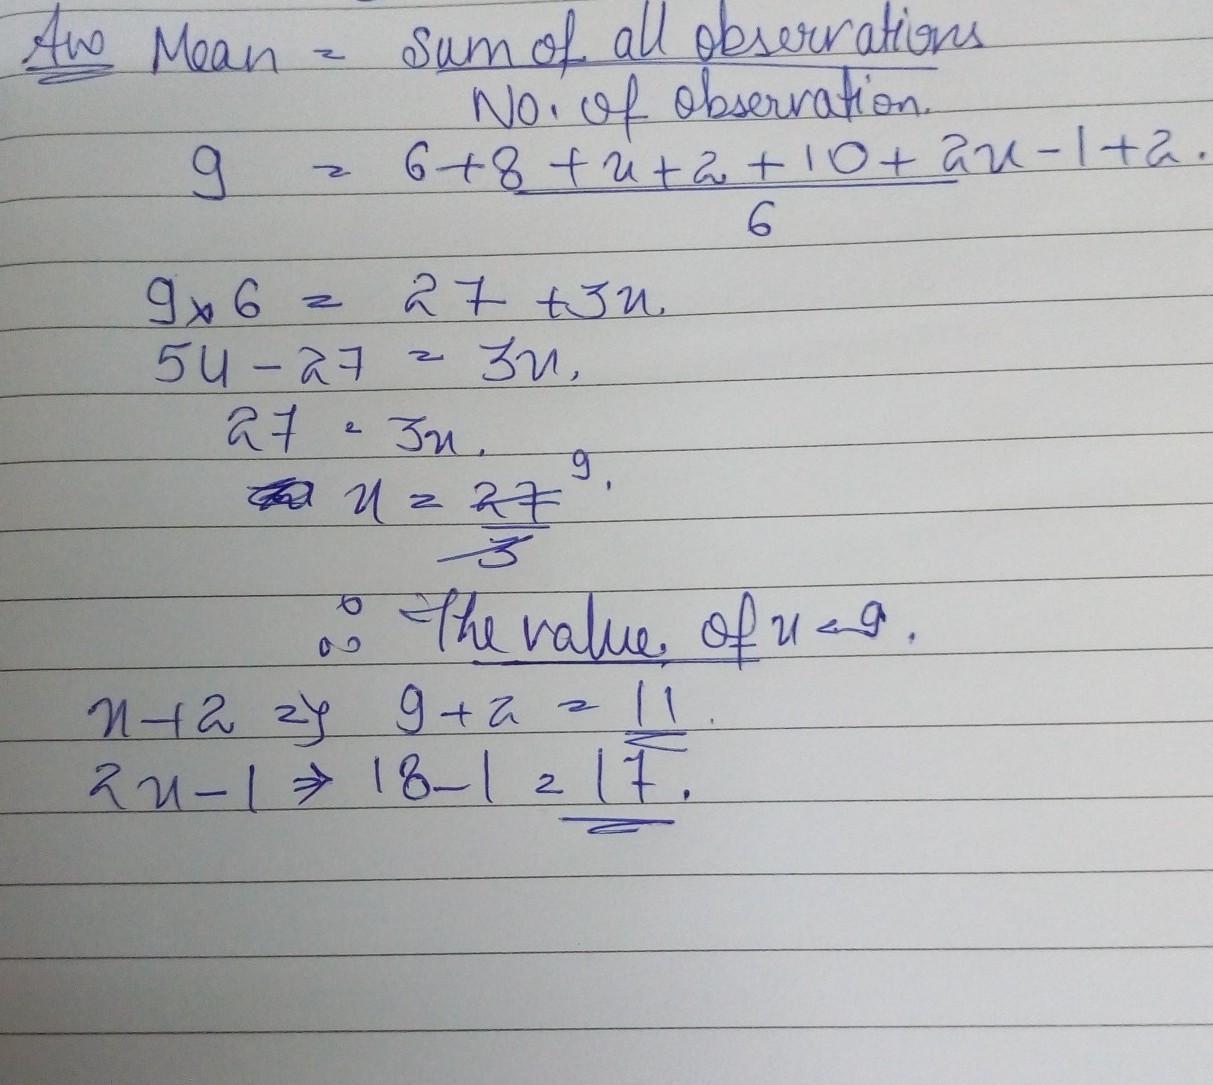 The mean of 6,8,x + 2, 10, 2x